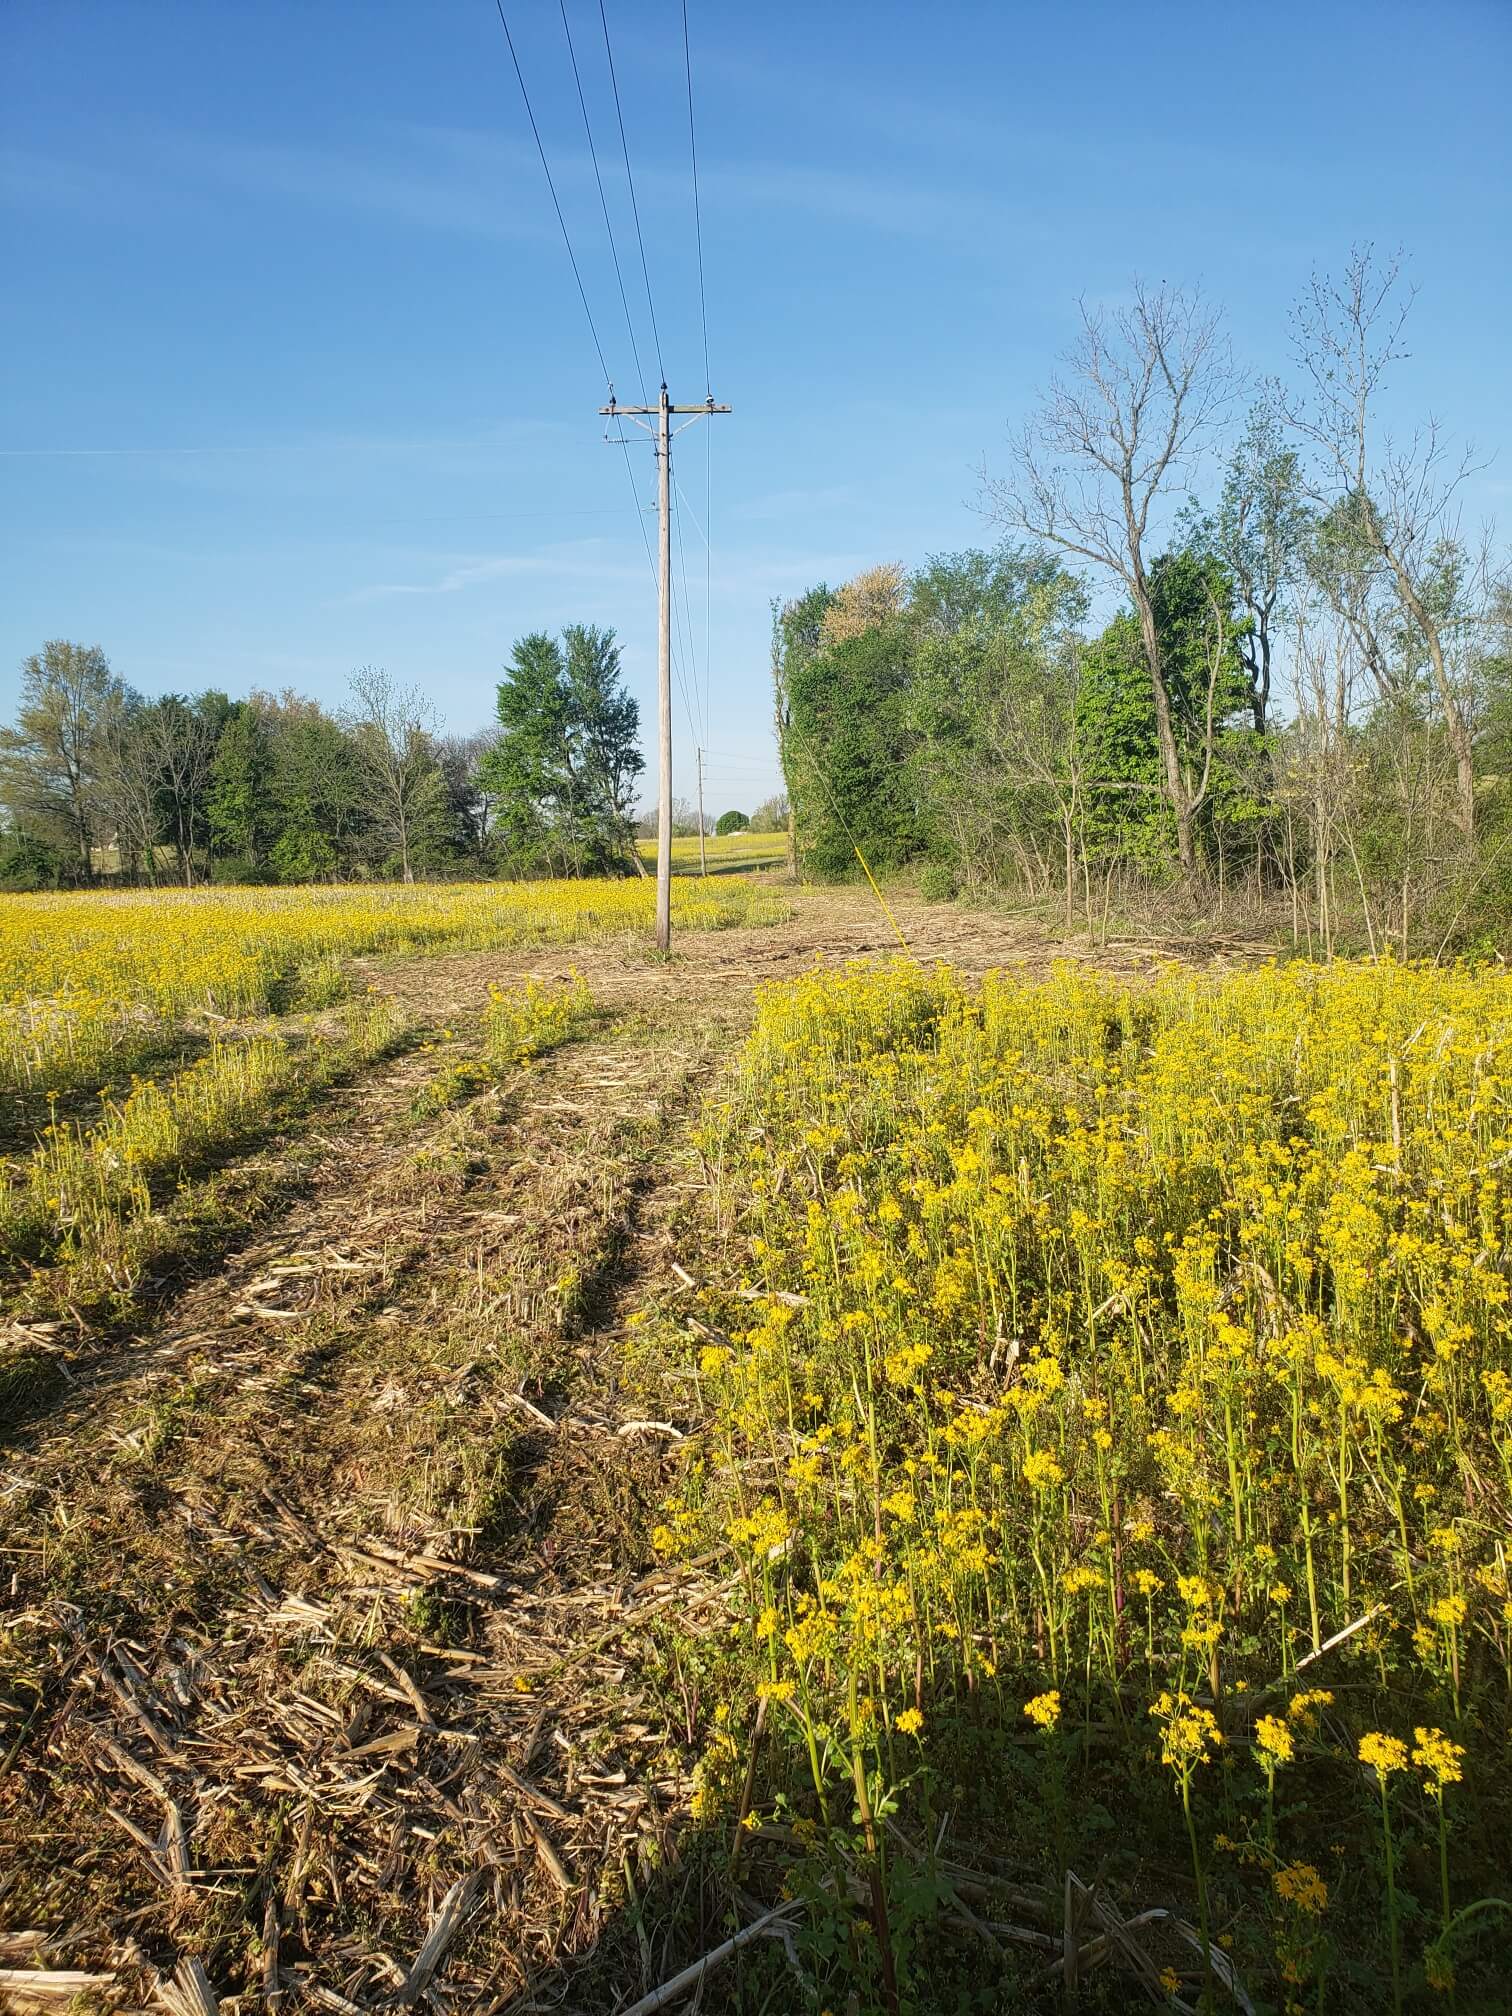 Cleared right-of-way field with yellow goldenrod